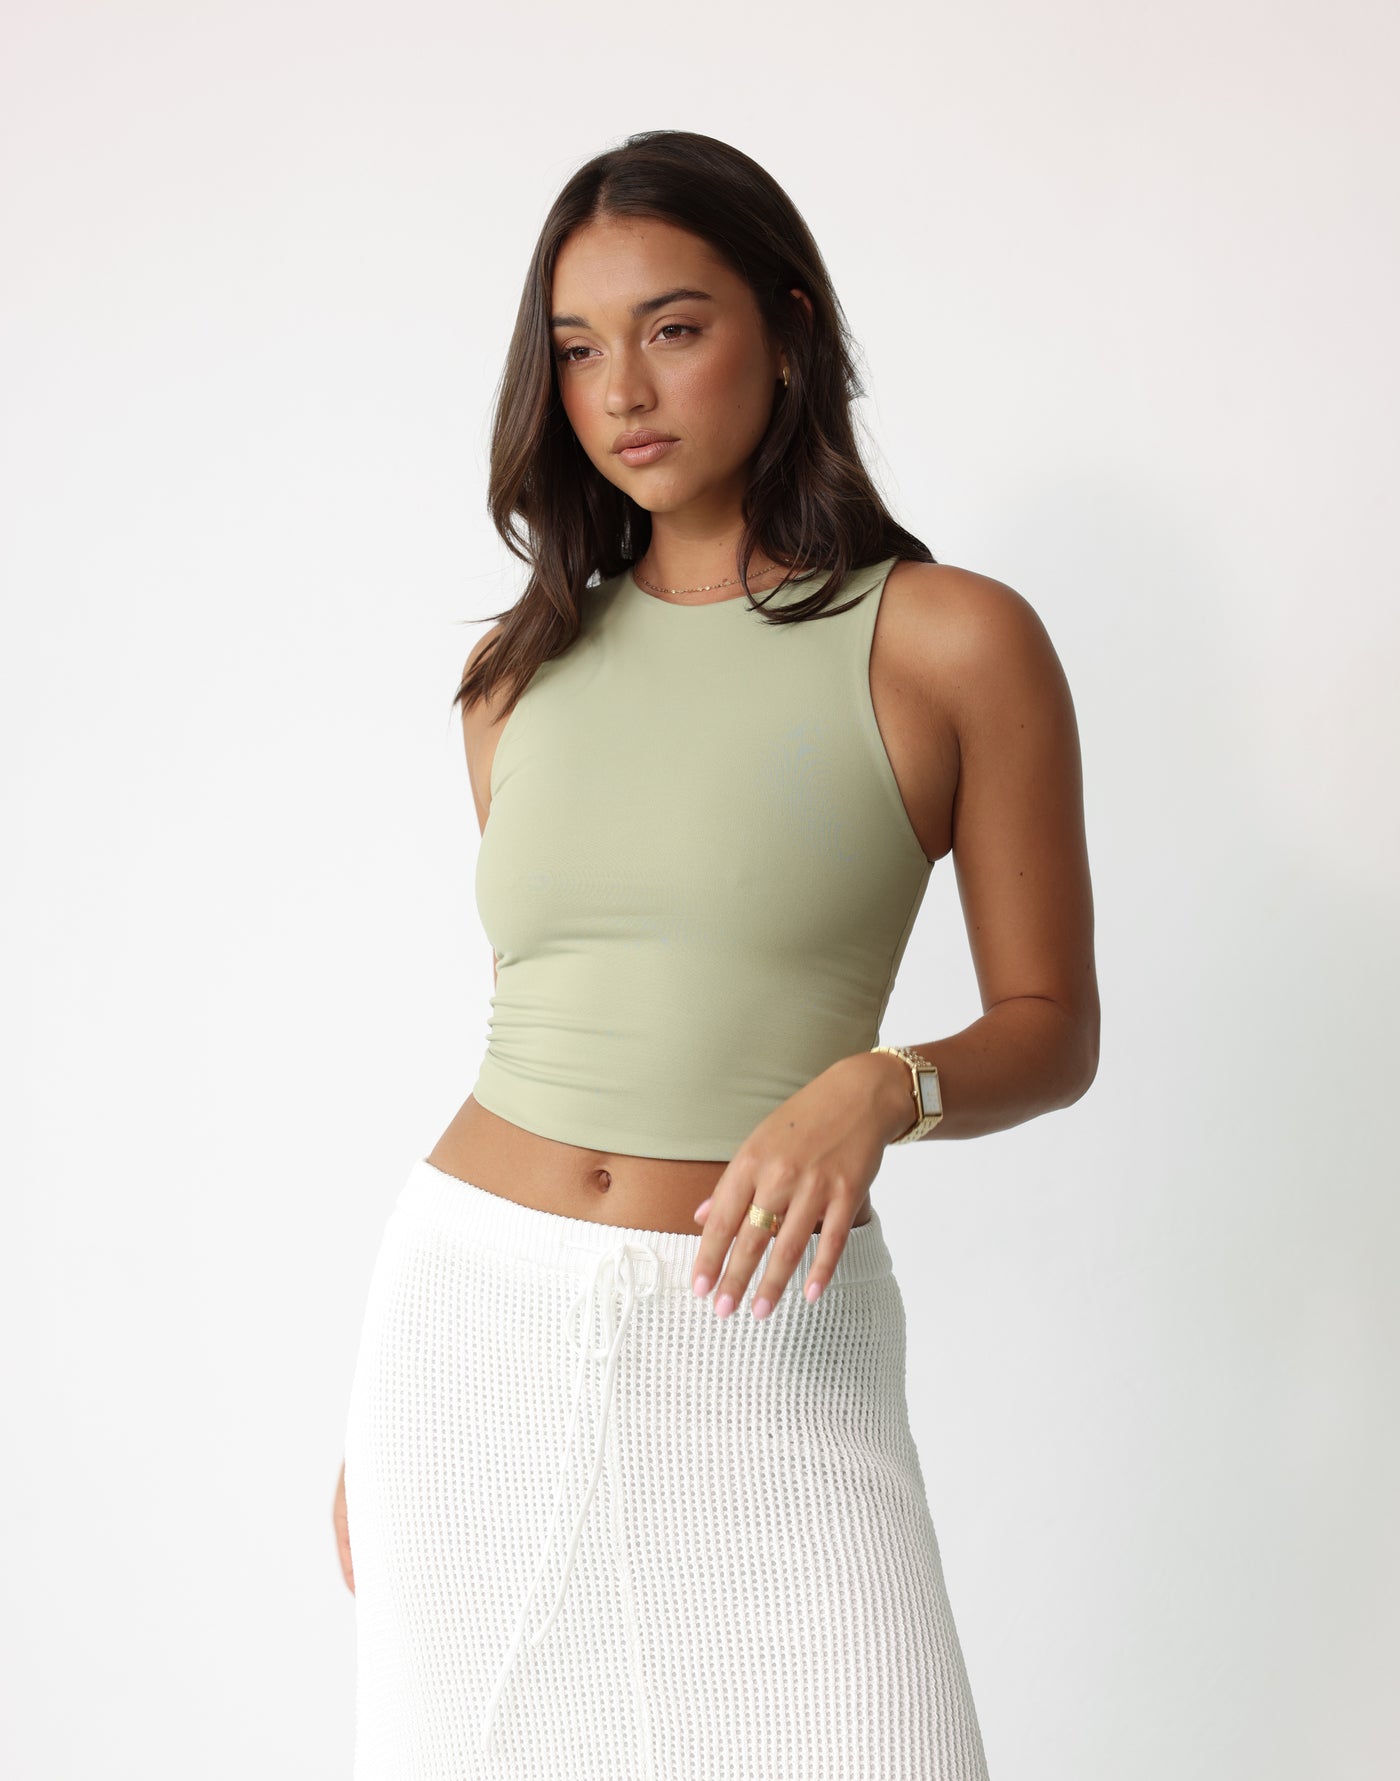 Alainn Top (Sage) - Bodycon Double Lined Crop Top - Women's Top - Charcoal Clothing